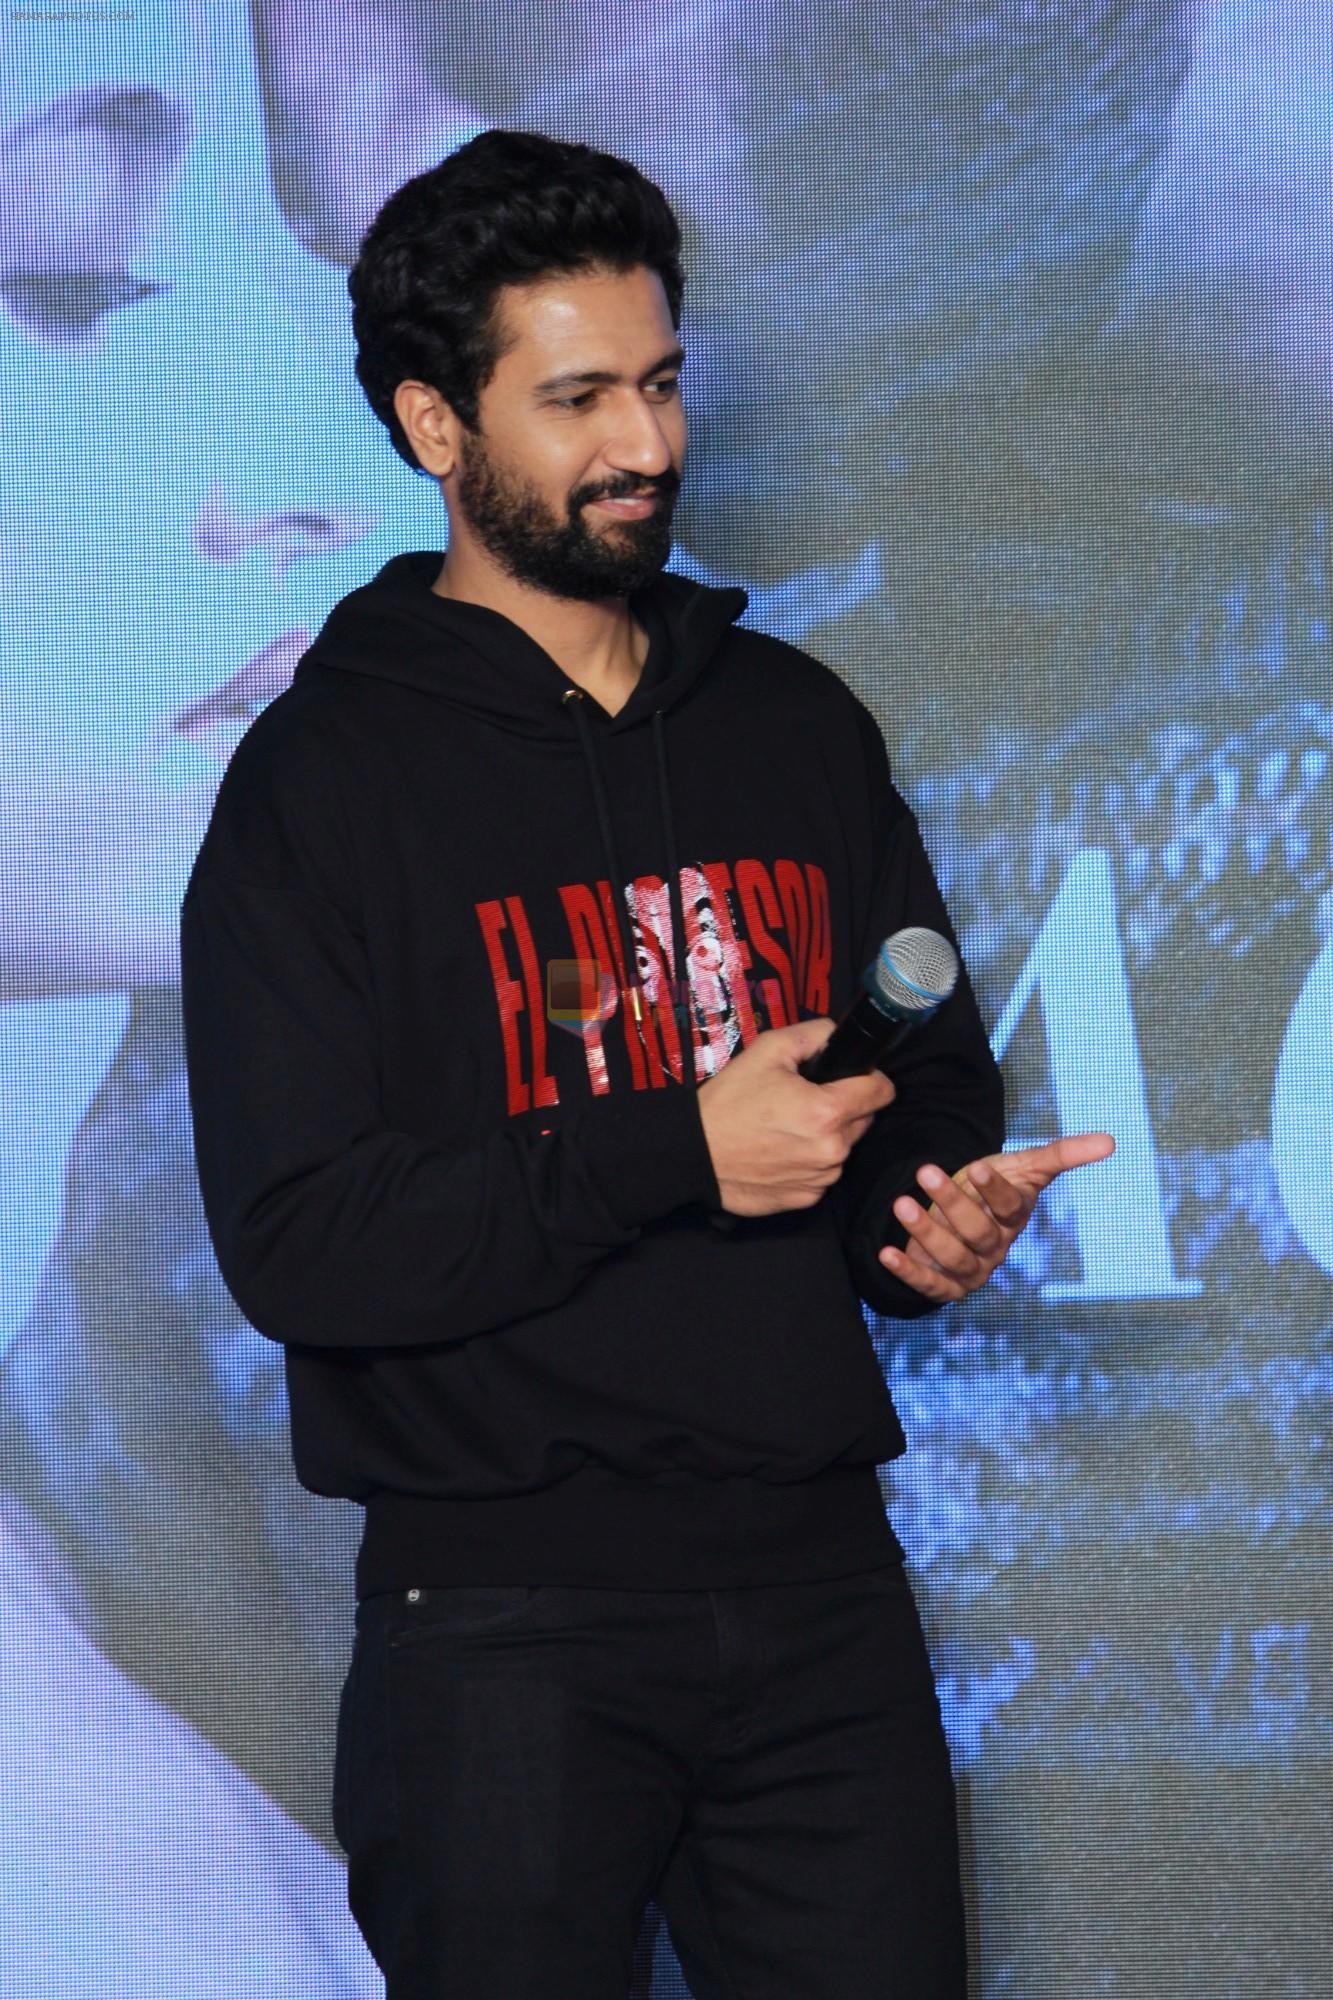 Vicky Kaushal Celebrate The Success Of Single Song Pachtaoge on 27th Aug 2019